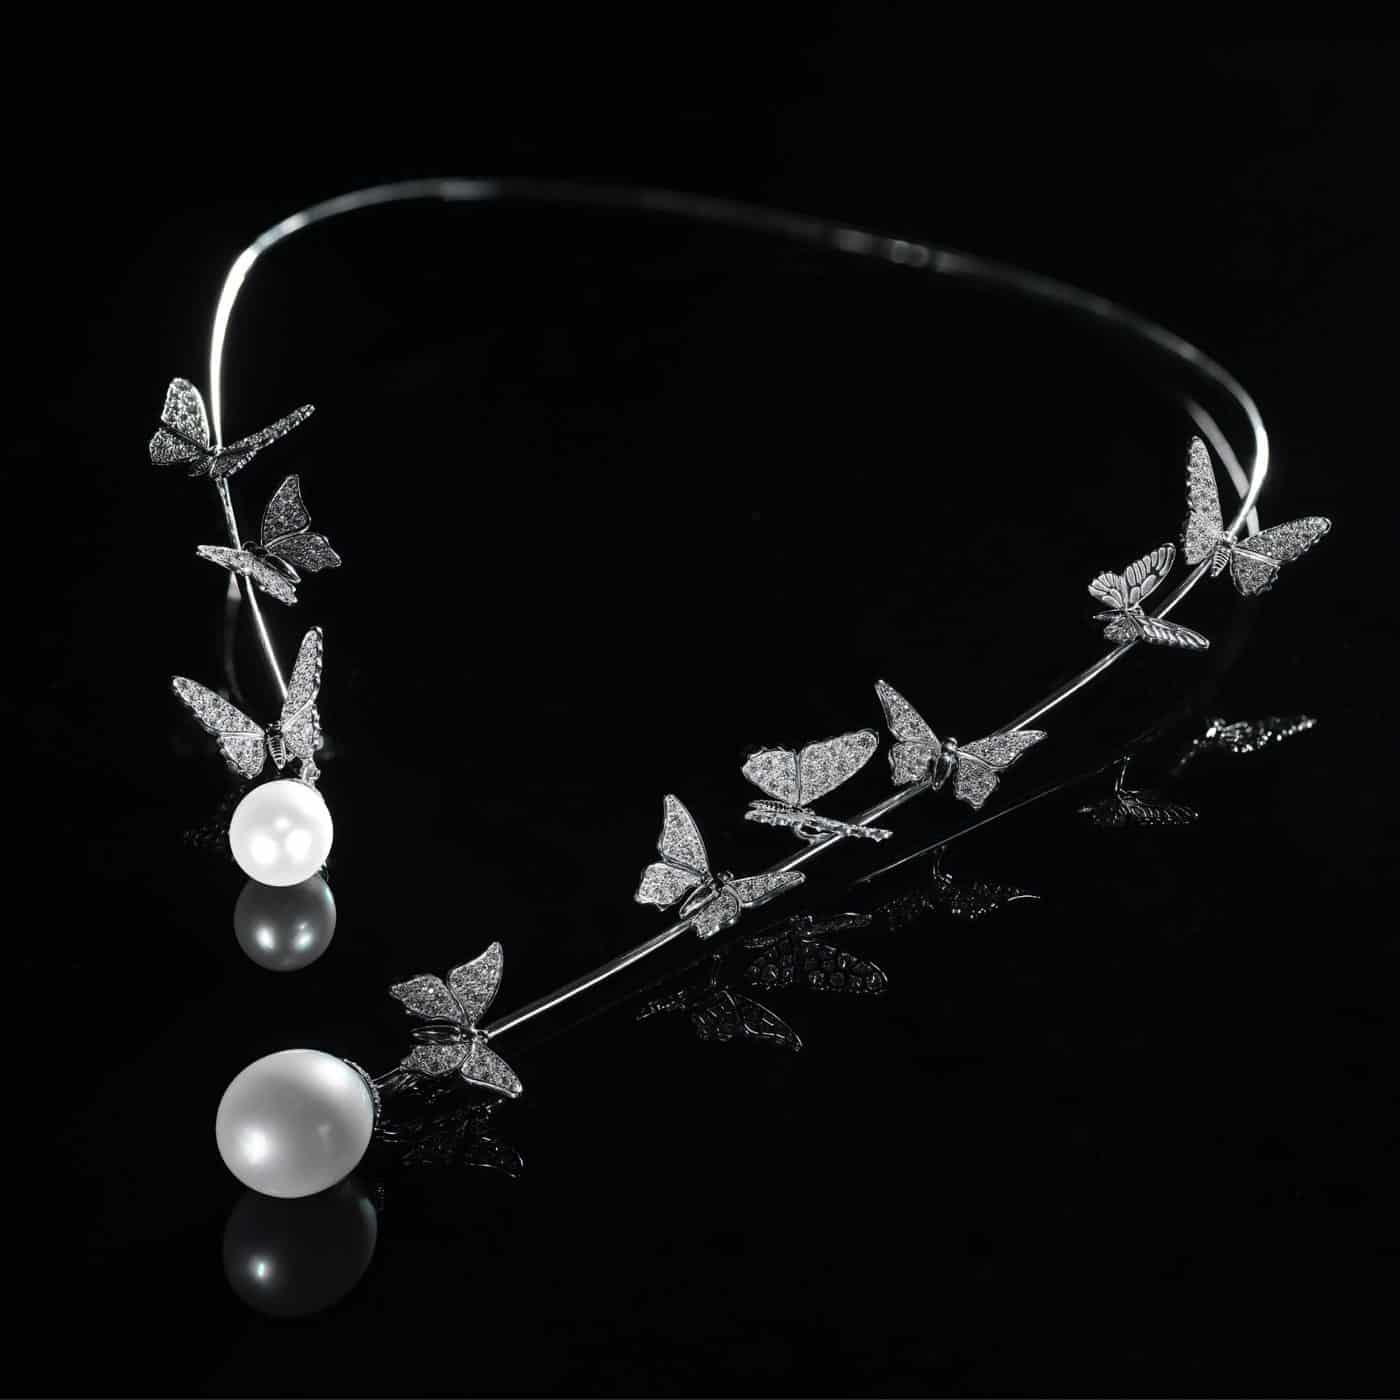 Butterfly 18K White Gold Open Necklace with Diamonds and Akoya Pearls by Édéenne